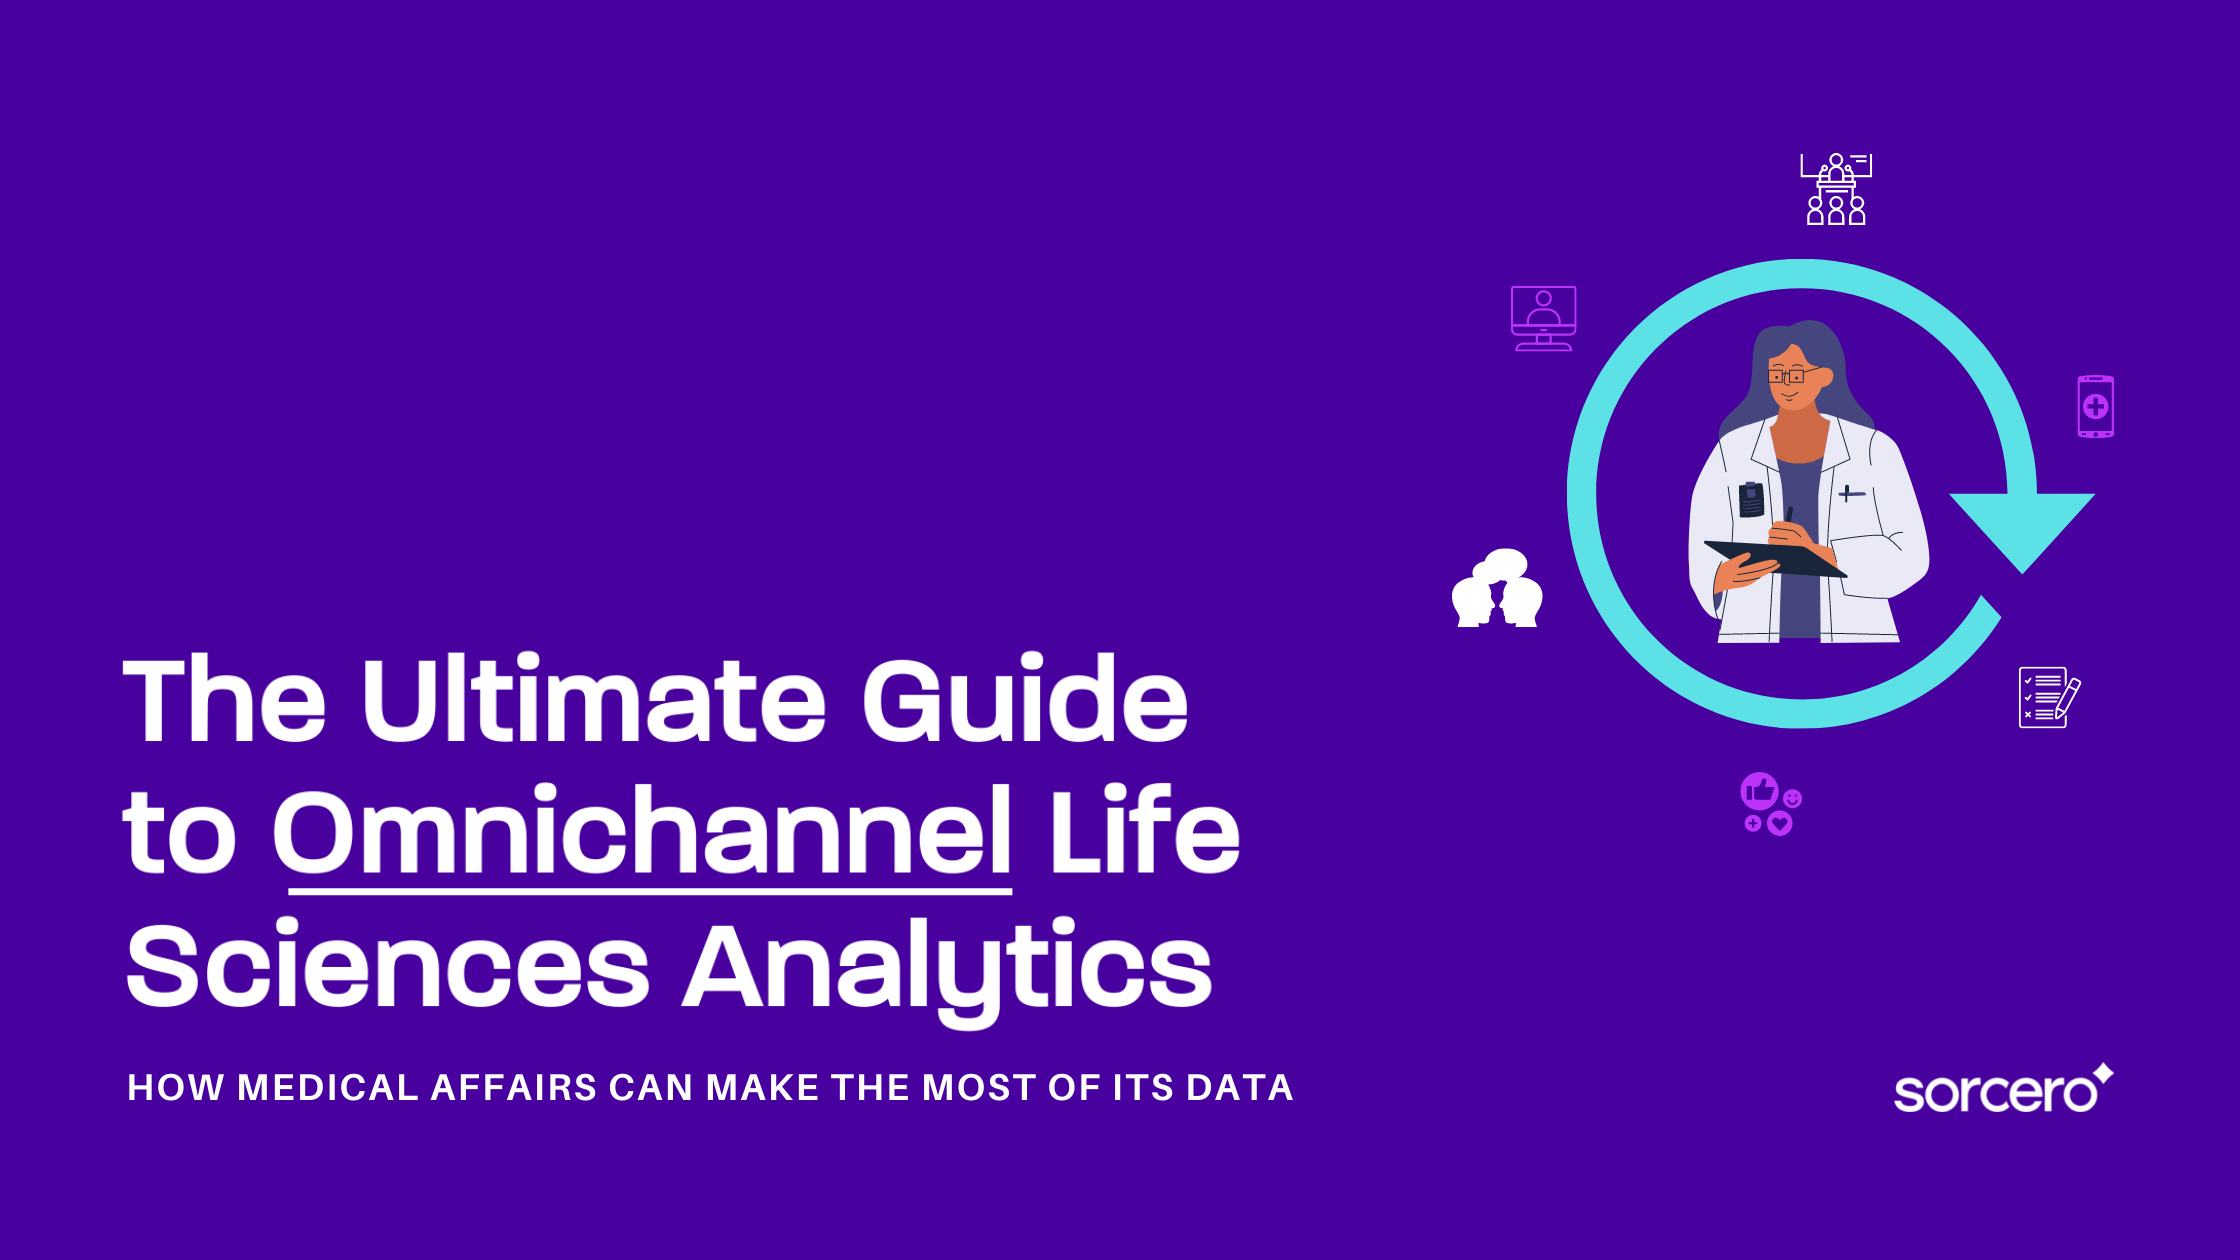 The Ultimate Guide to Omnichannel Life Sciences Analytics